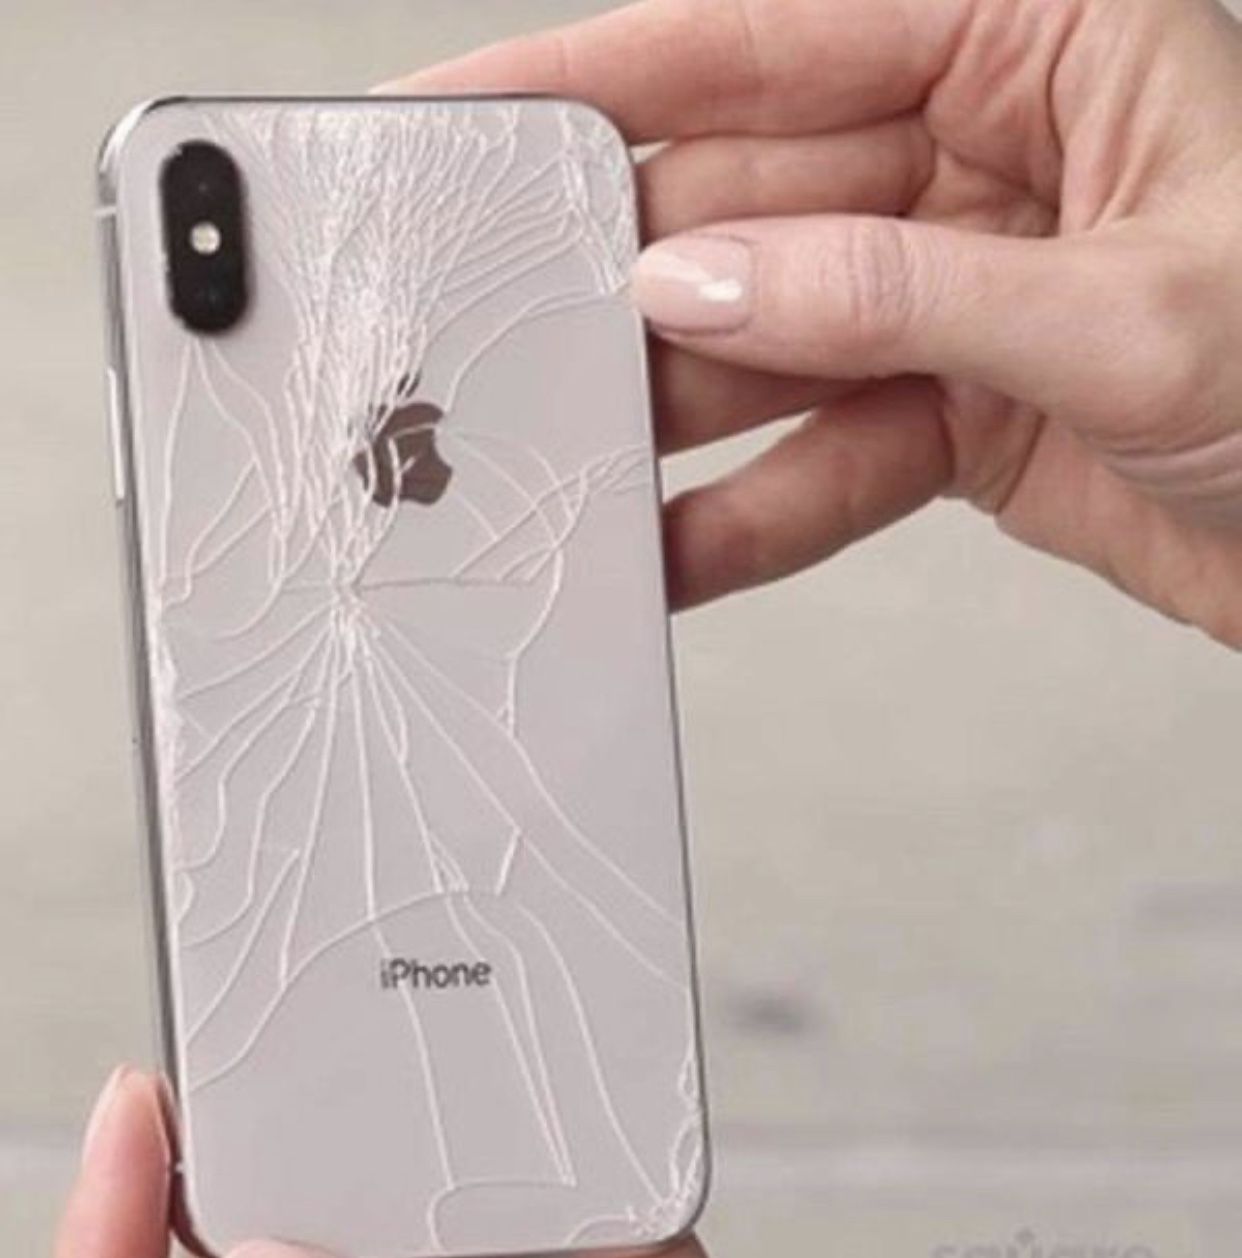 IPHONE X/XS/ Xr/ XS MAX/ 8/8 PLUS BACK GLASS IS AVAILABLE